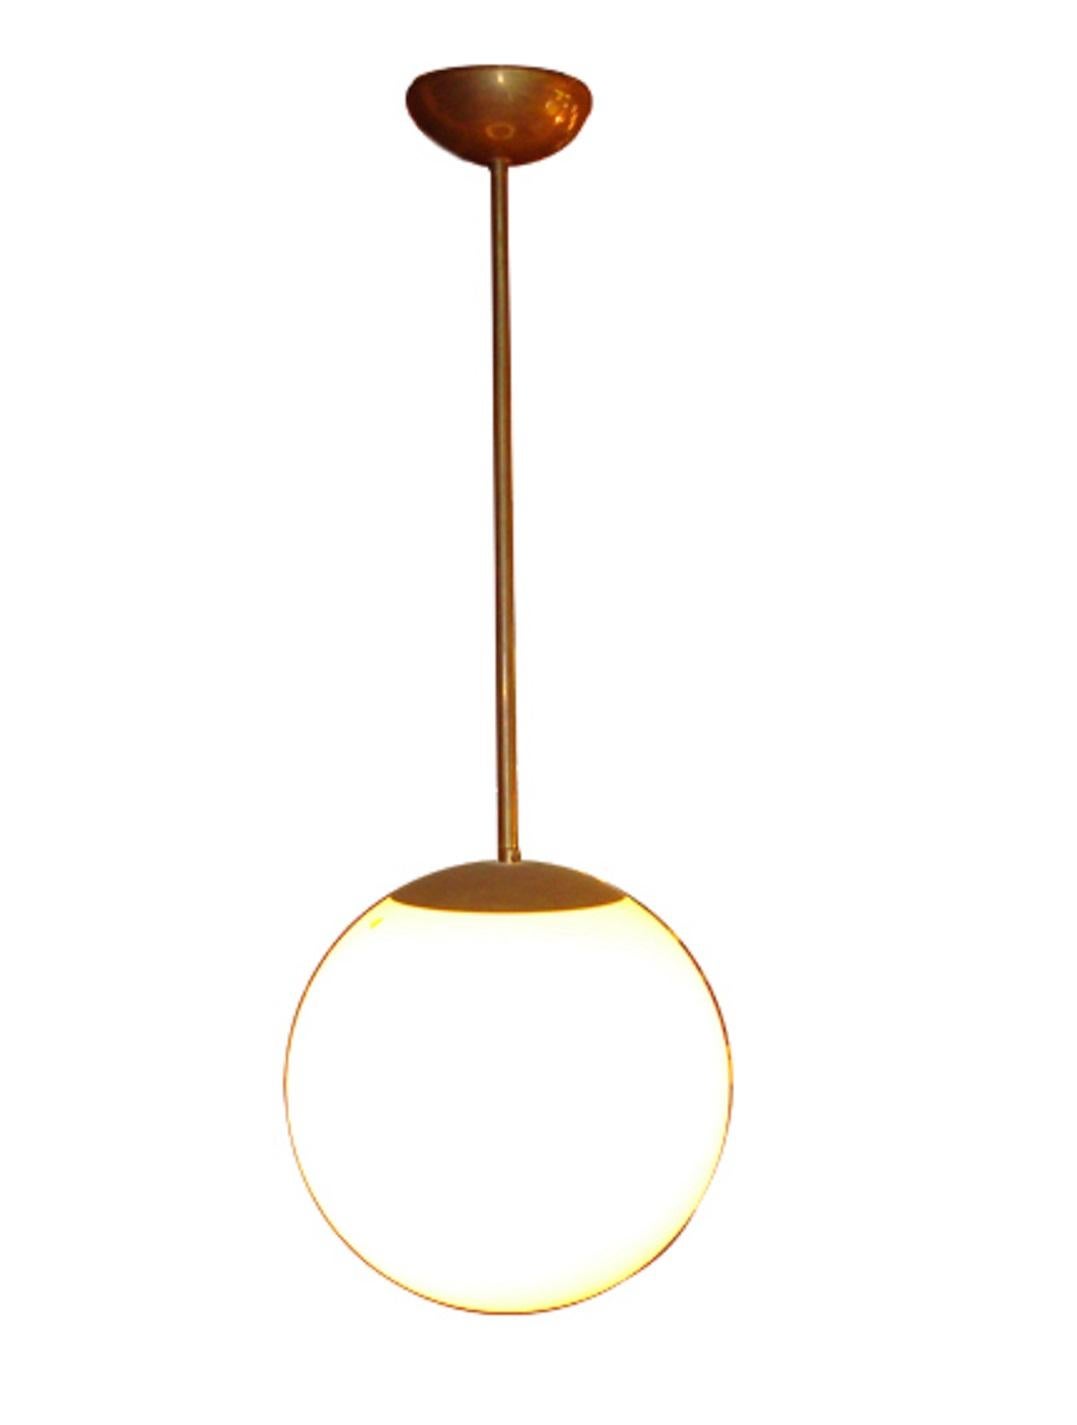 5 hanging lamp

Material: bronze and opalina glass
Style: Art Deco
Country: German
To take care of your property and the lives of our customers, the new wiring has been done.
If you are looking for an chandelier to match the set of sconces we have